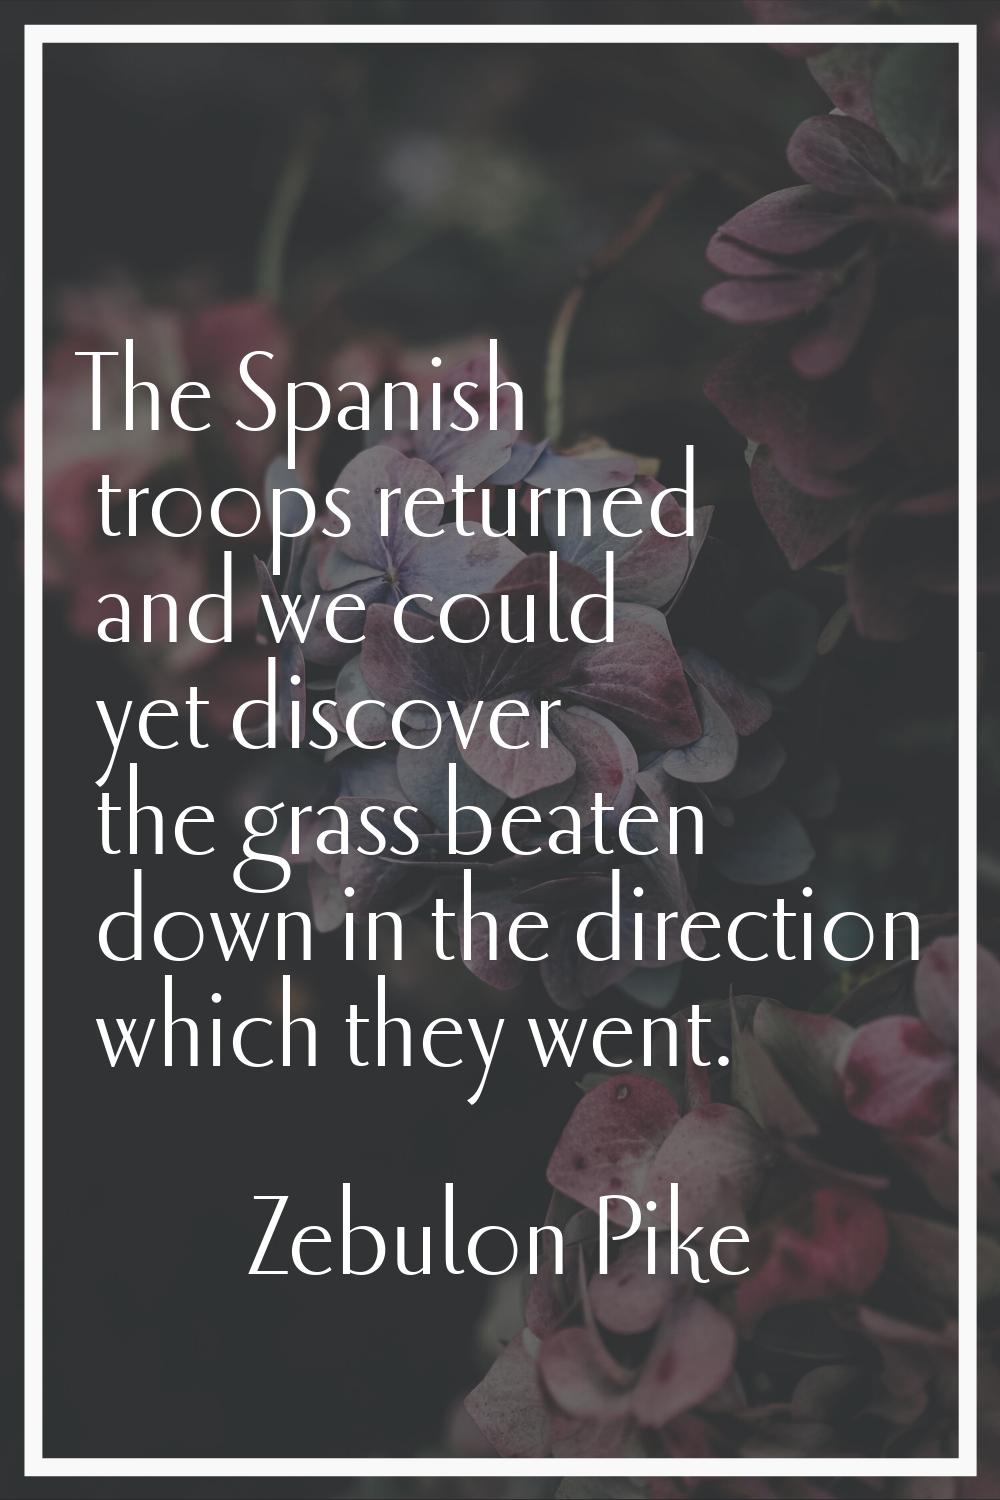 The Spanish troops returned and we could yet discover the grass beaten down in the direction which 